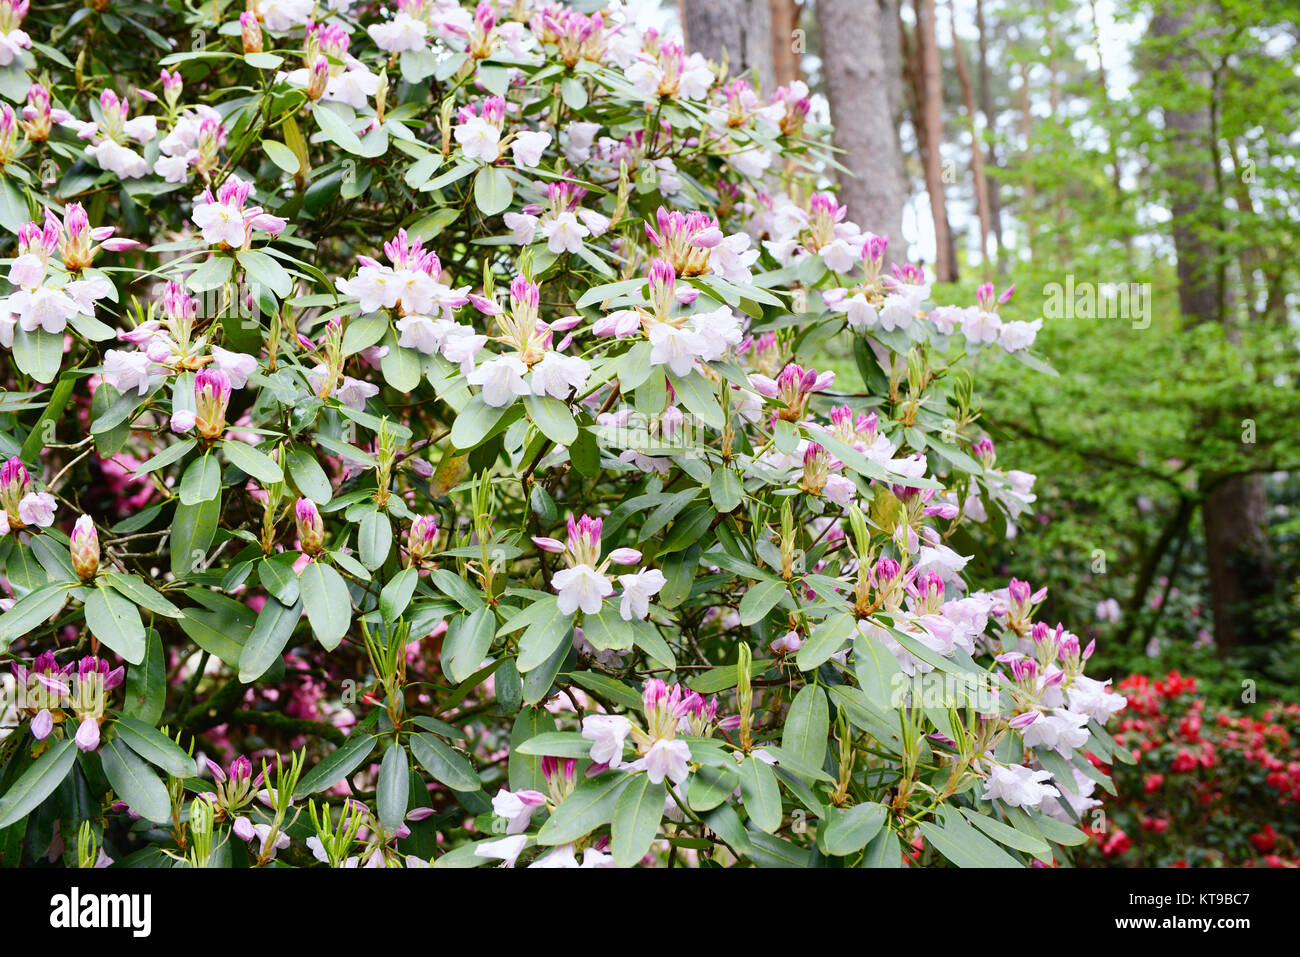 Rhododendron bush bloosom on springtime. Pink buds and flowerheads. Stock Photo